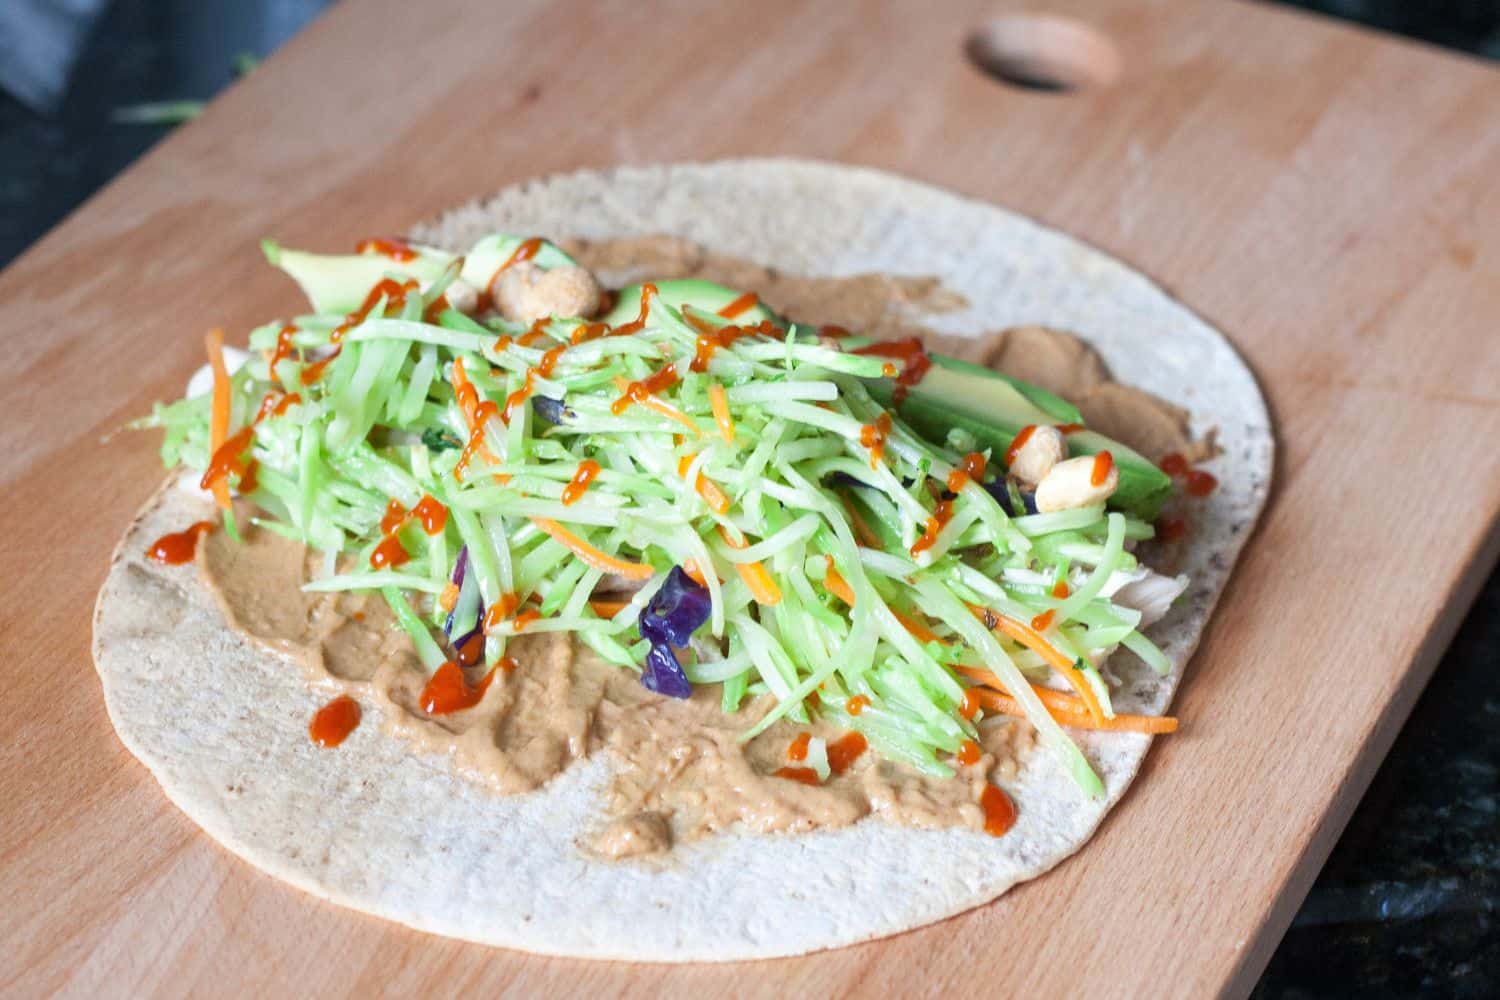 Easy Thai Peanut Wrap is a healthy make ahead quick meal. Get the recipe on GoodieGodmother.com